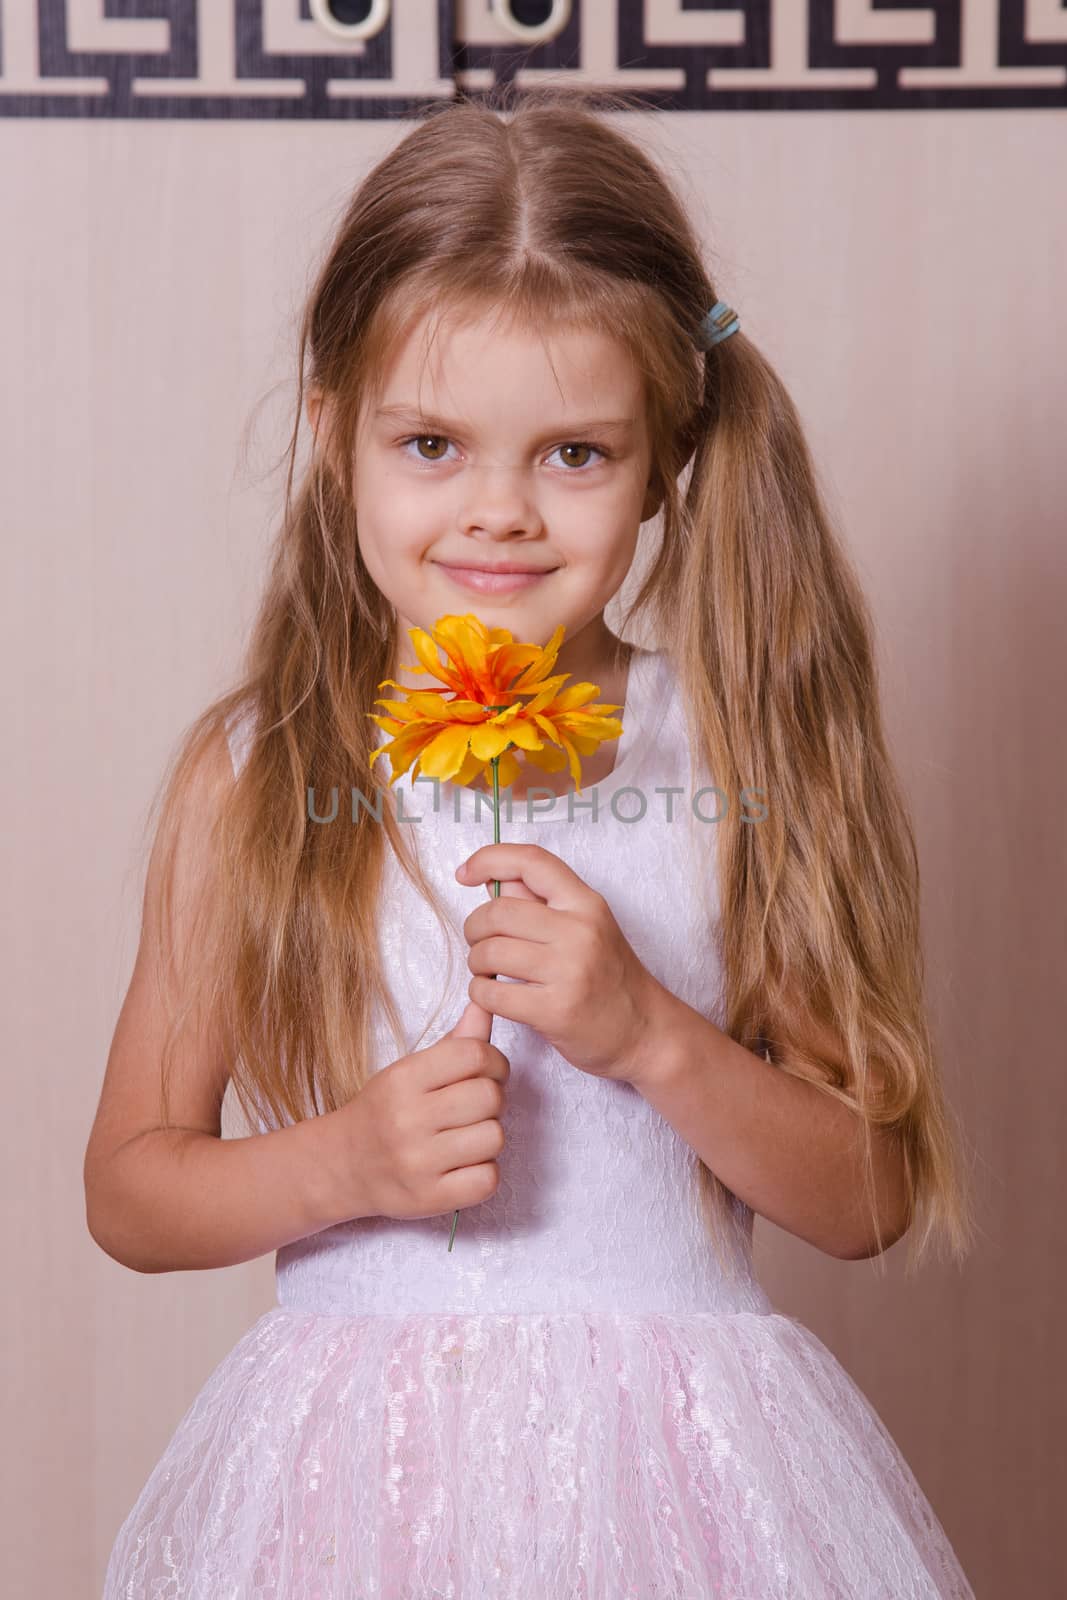 Five-year girl in a white dress holding a flower